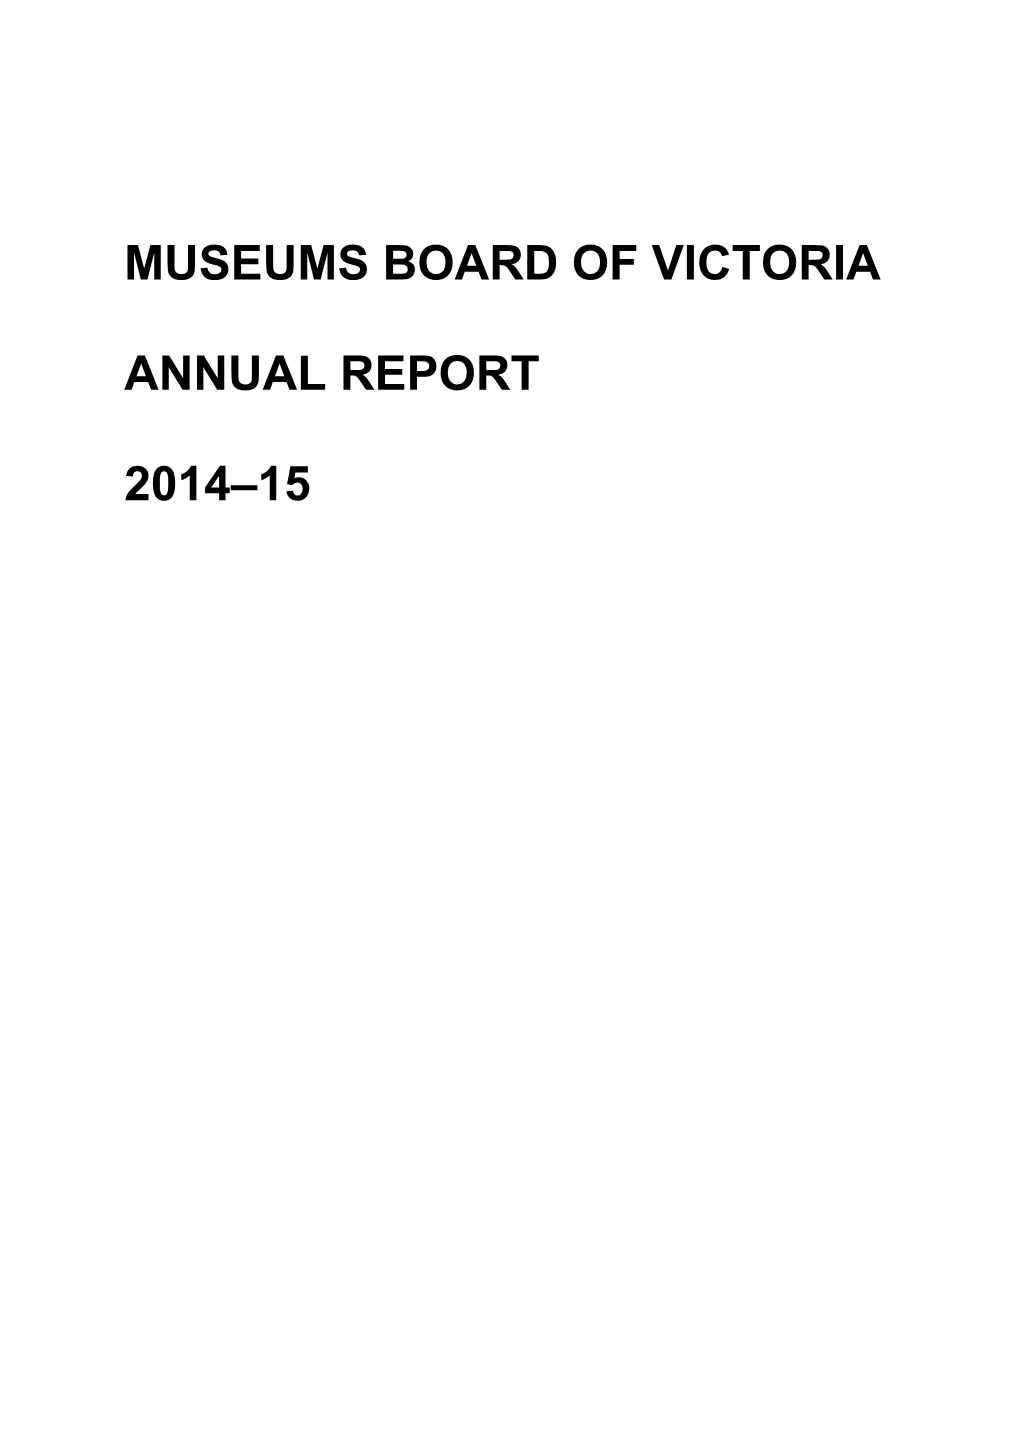 Museums Board of Victoria